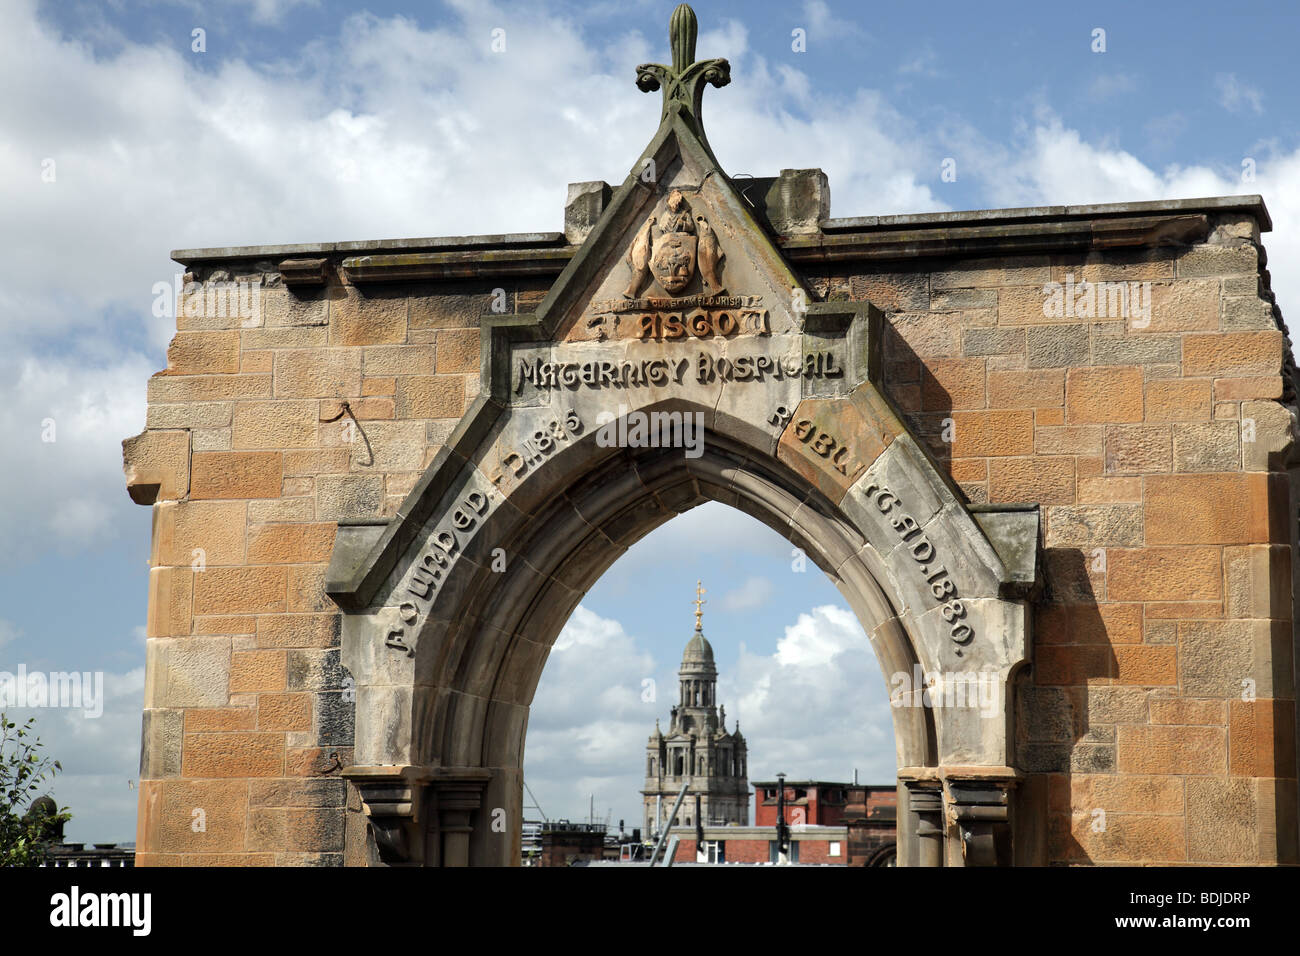 Dome of the City Chambers viewed through the Rottenrow Arch, Glasgow, Scotland, UK Stock Photo